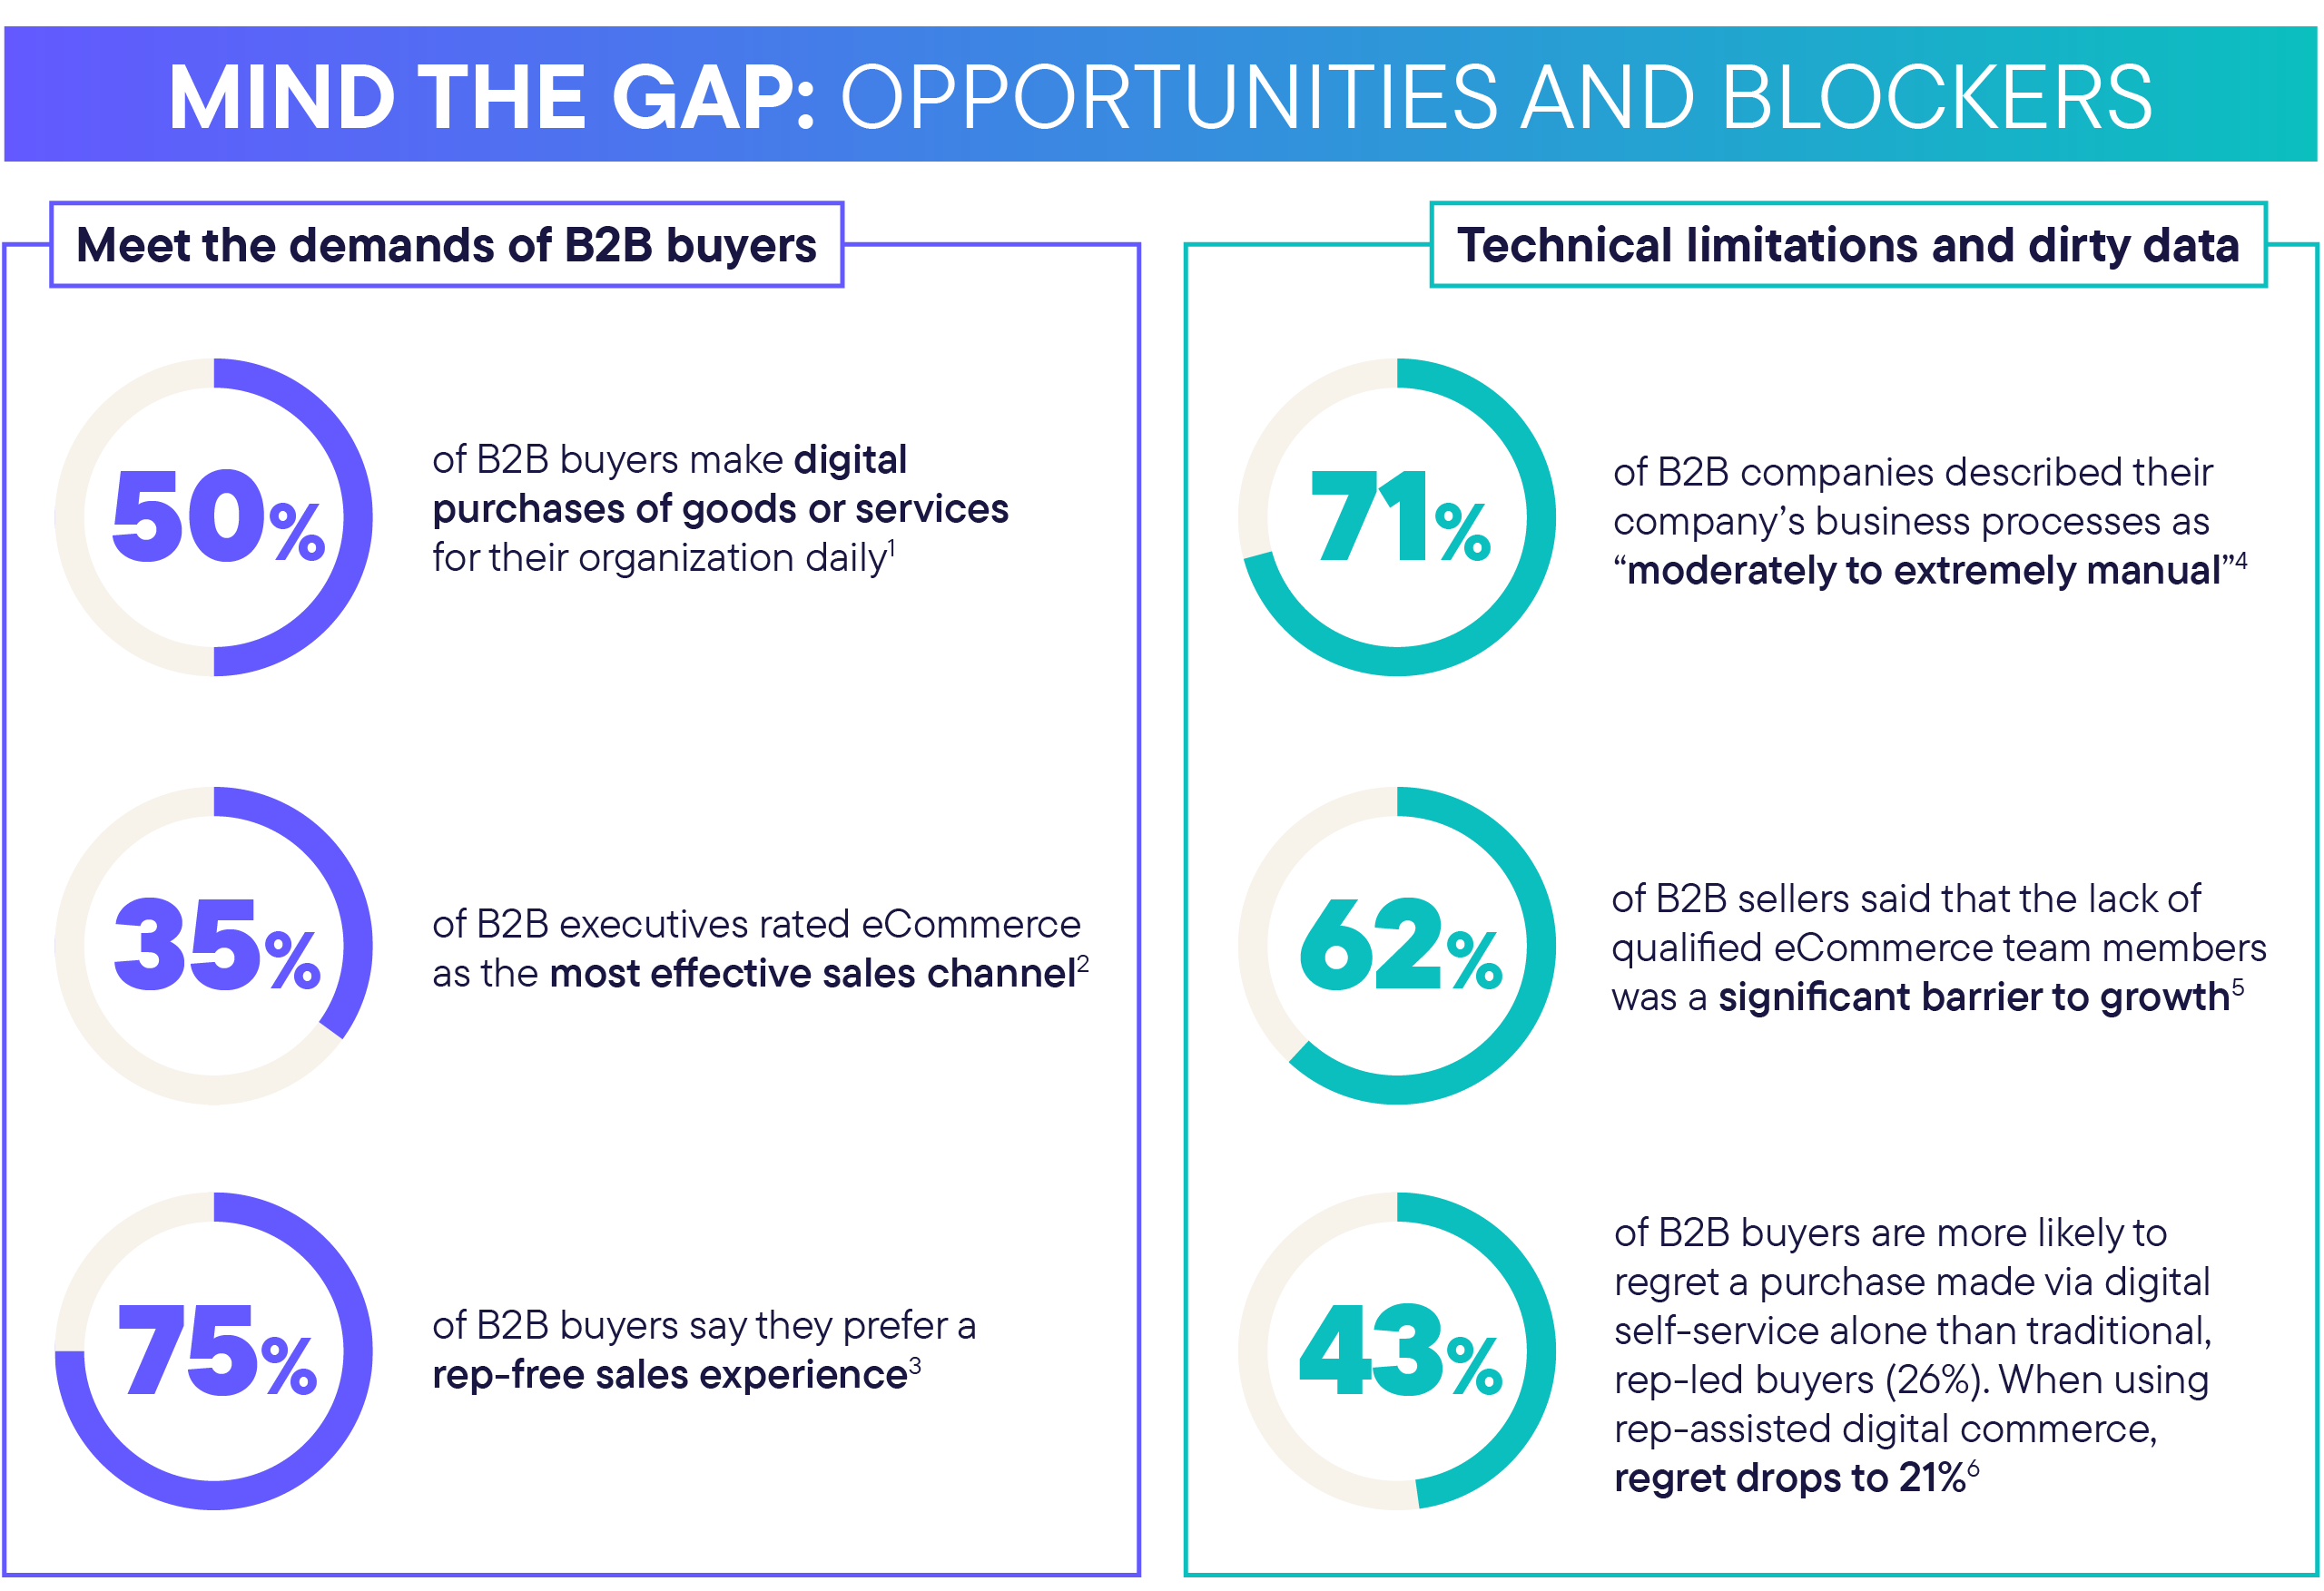 Opportunities and blockers in B2B commerce in 2024